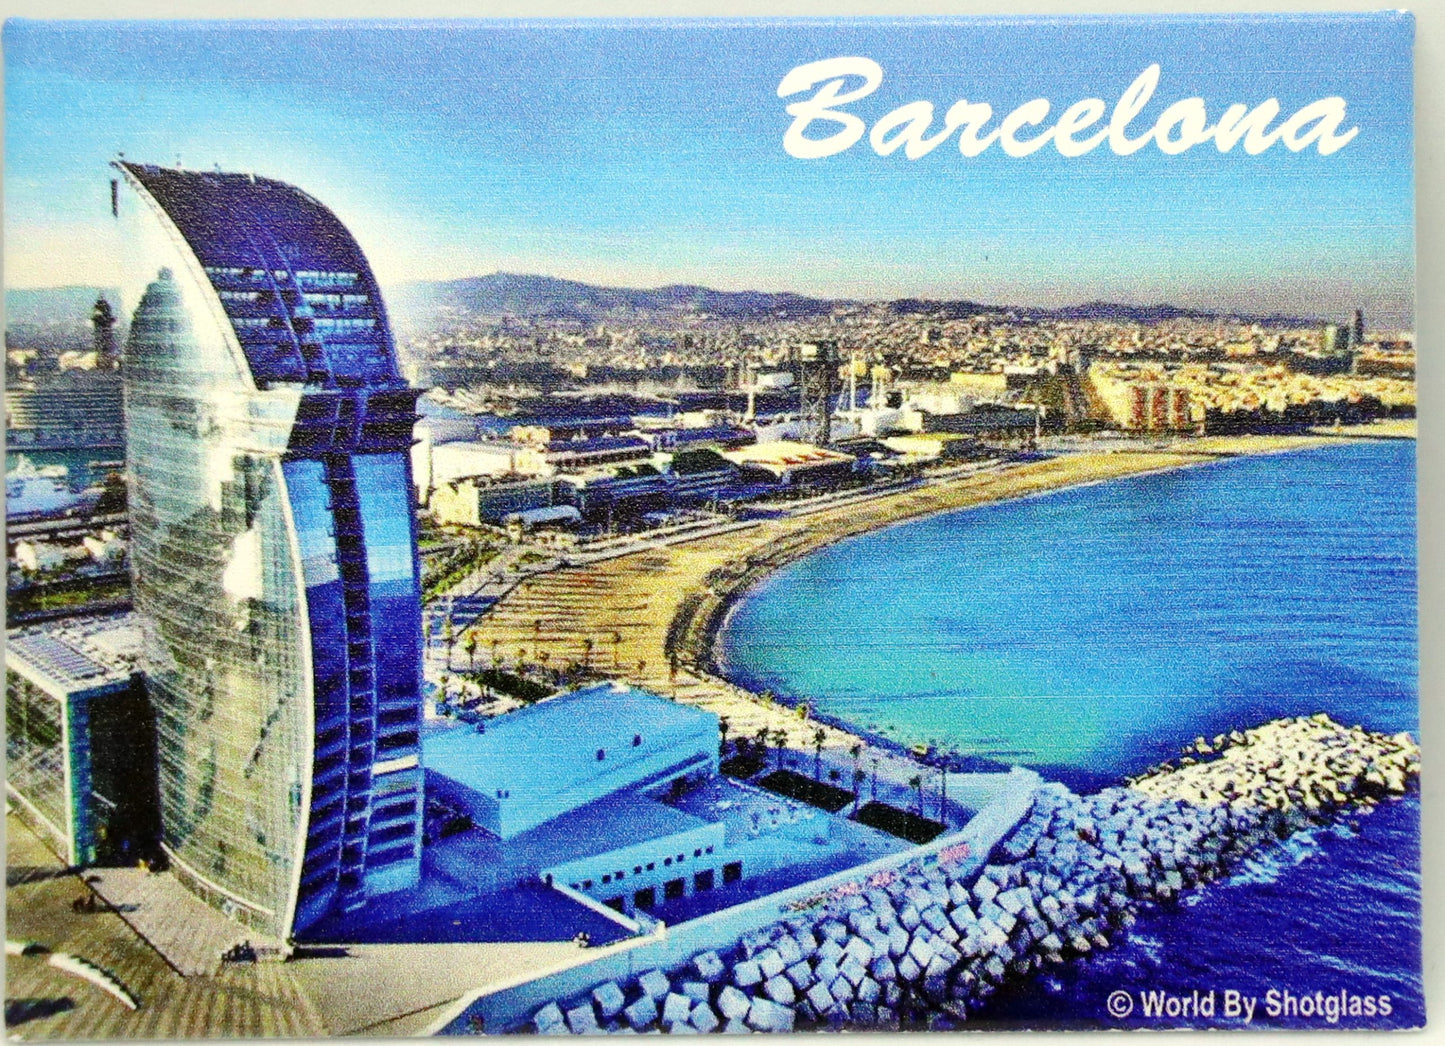 Barcelona Spain Panorama Fridge Collector's Souvenir Magnet 2.5 inches X 3.5 inches